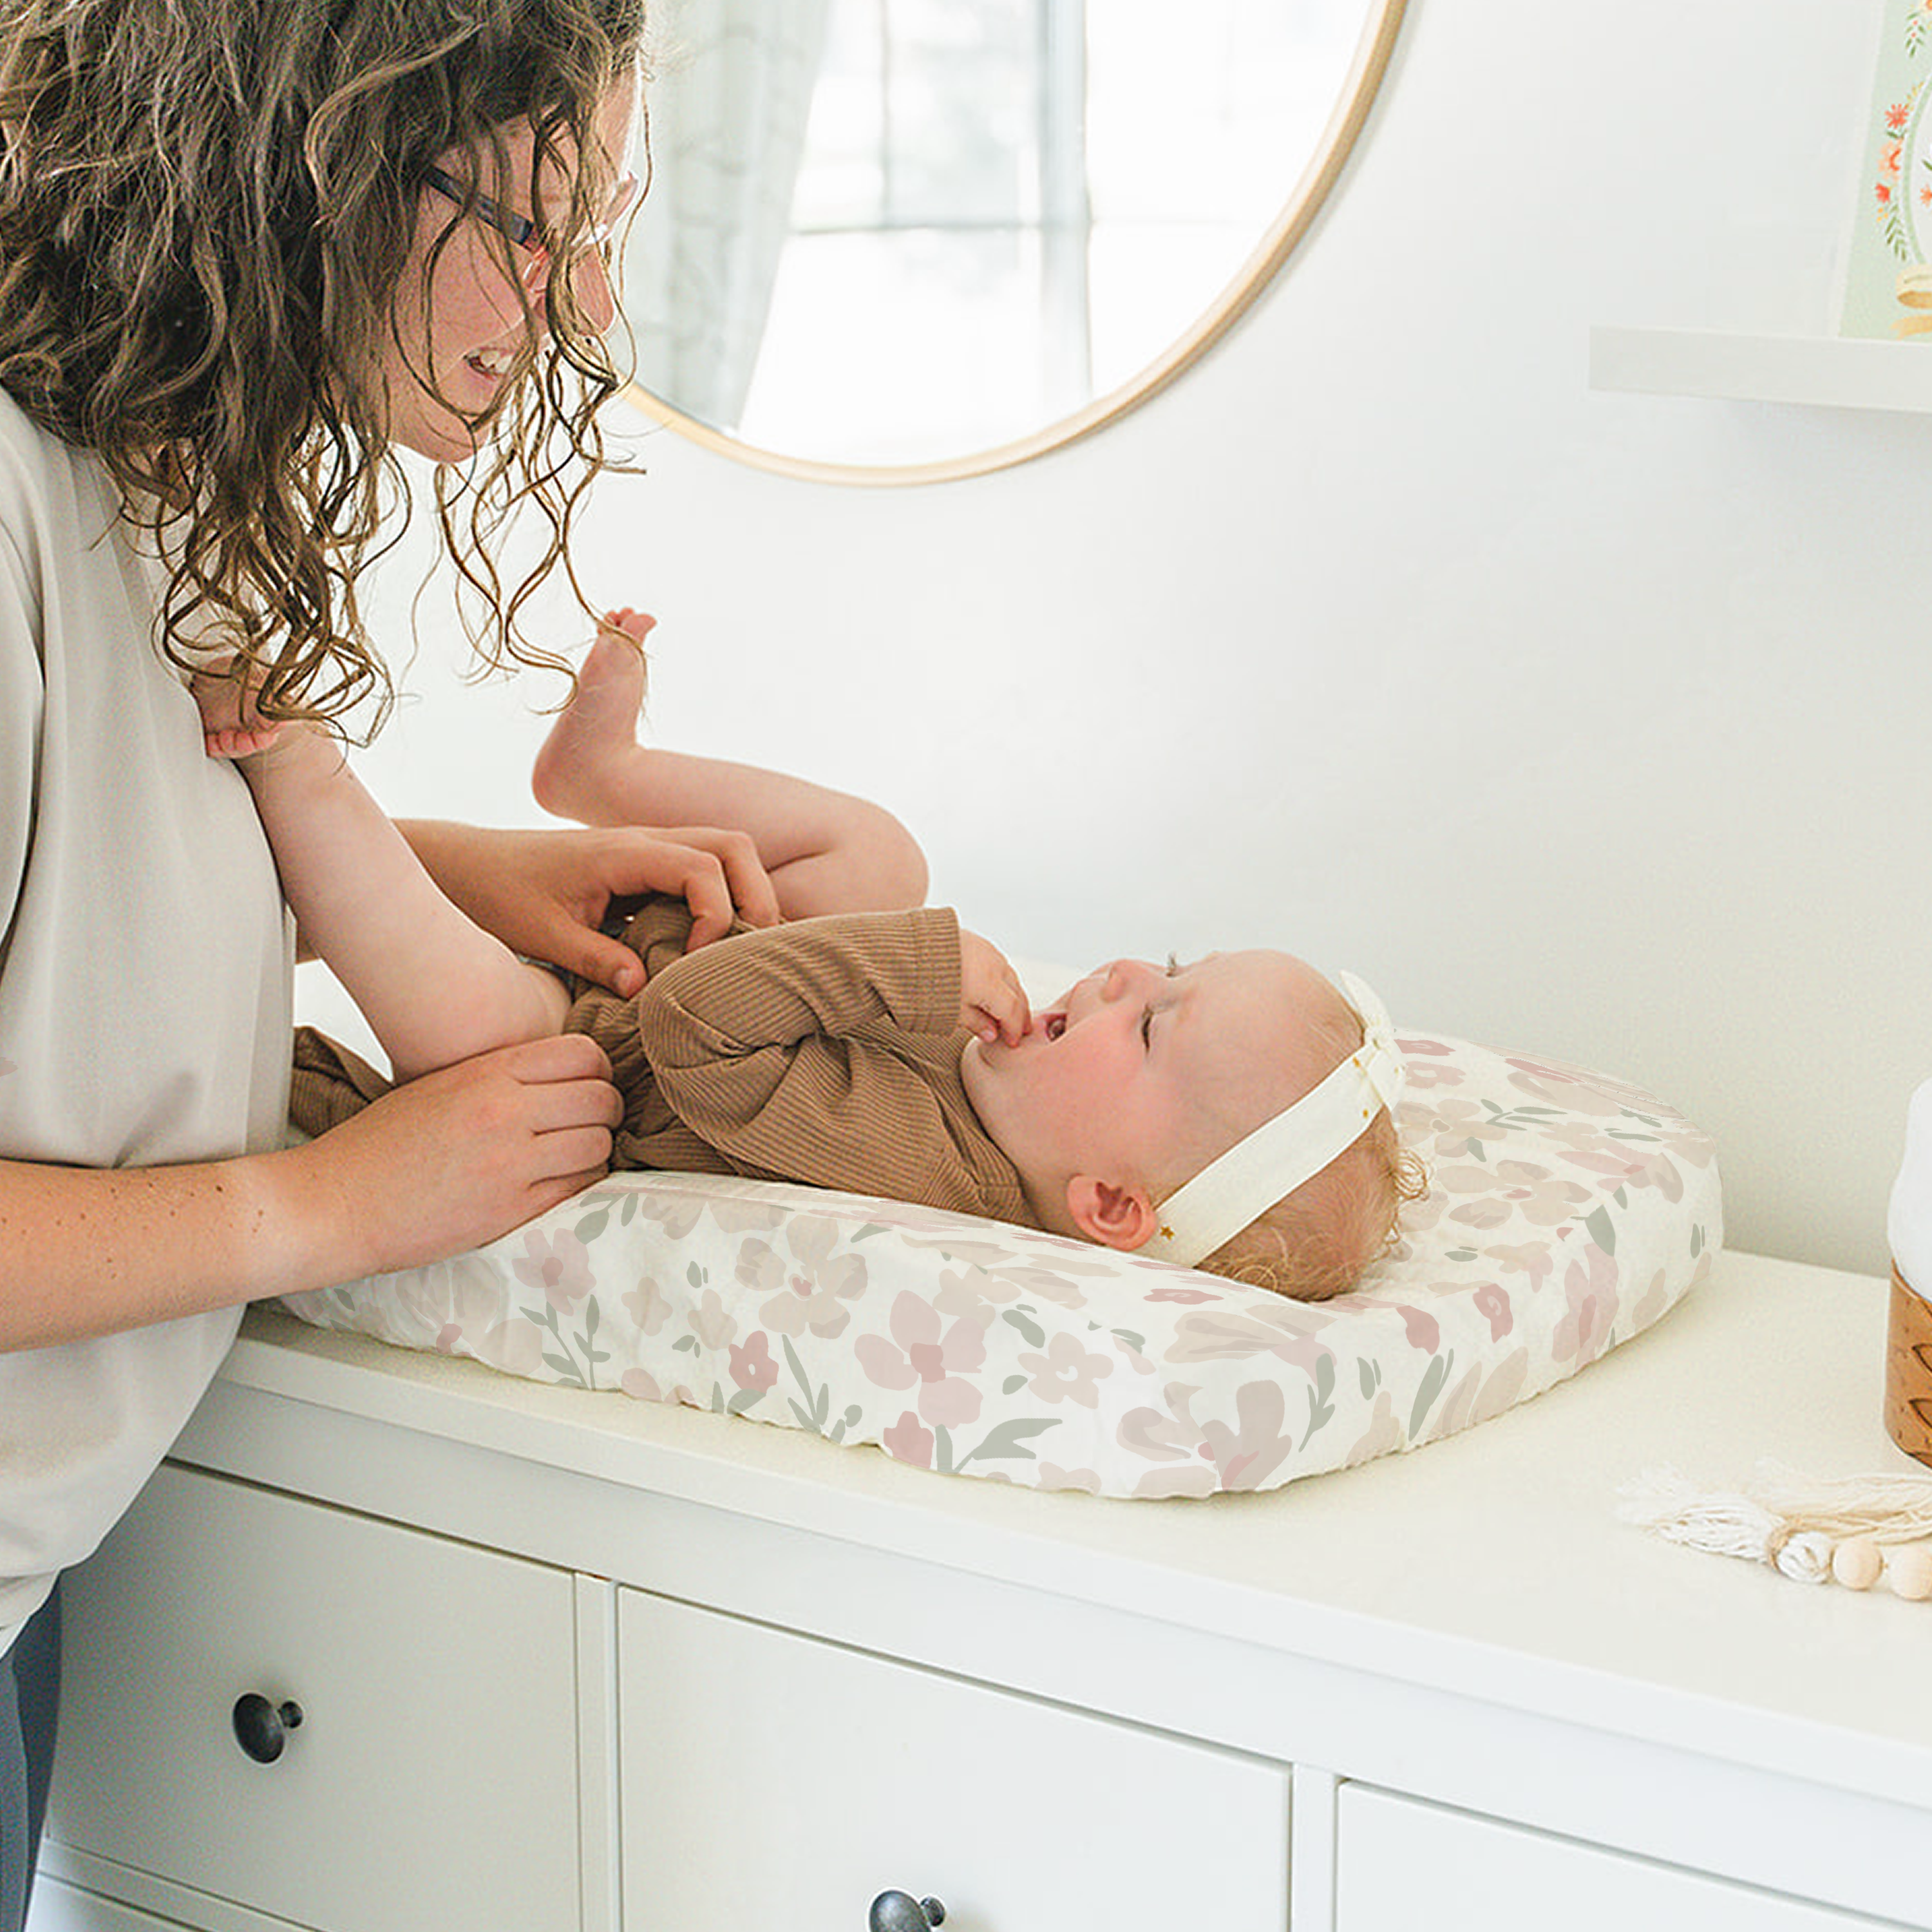 A young girl gently cares for a baby lying on a Organic Cotton Changing Pad Cover in Blossom by Makemake Organics on top of a dresser in a bright, well-lit room, symbolizing a nurturing moment.